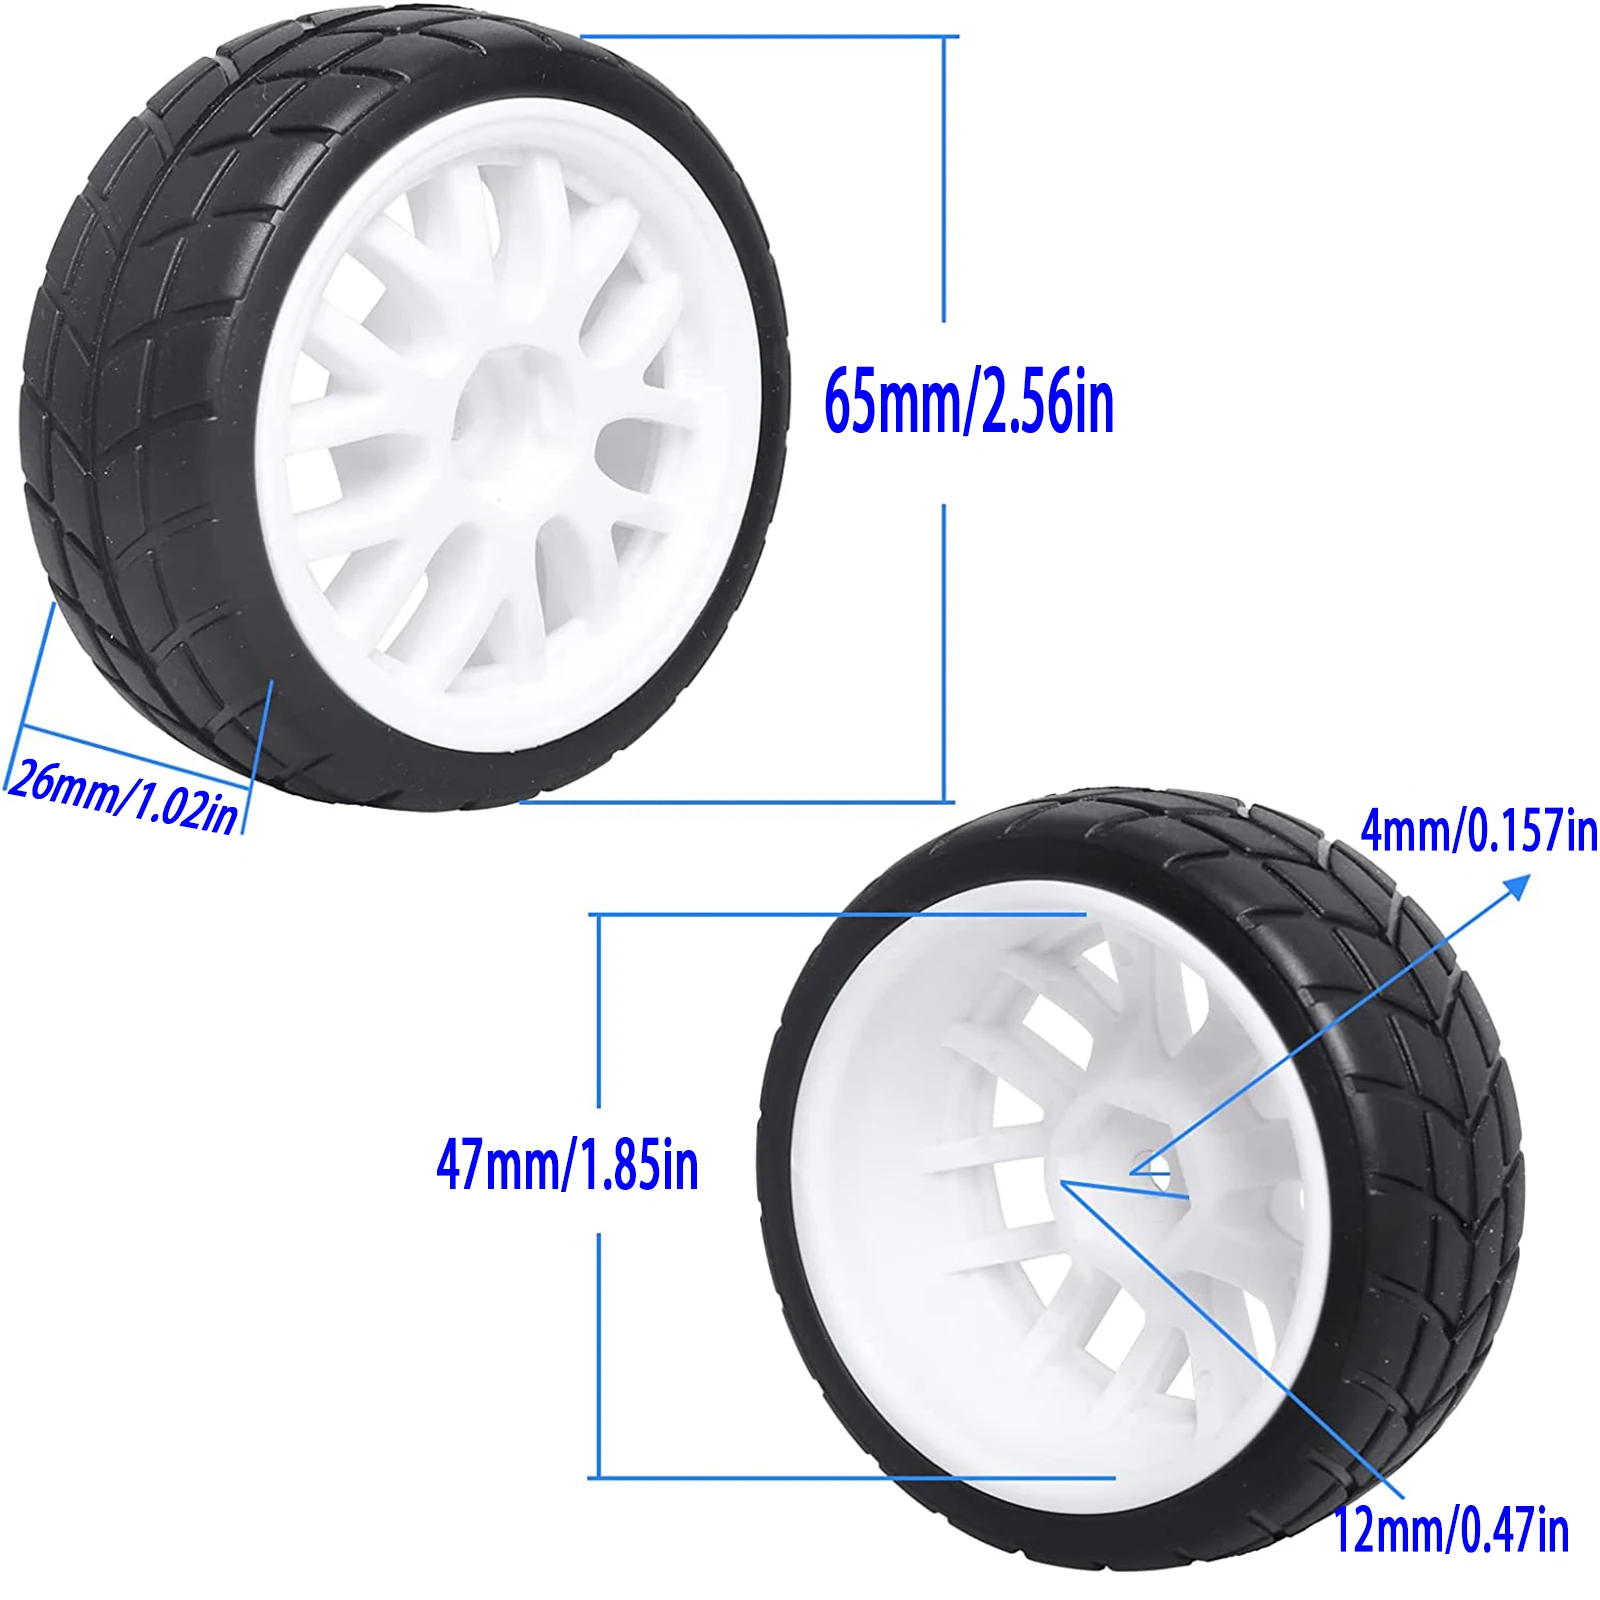 

4X RC Tires & Wheels Rims Sets Y Shaped Width:26MM 12MM Hex Drive Hub For 1/10 Scale On Road Touring Racing